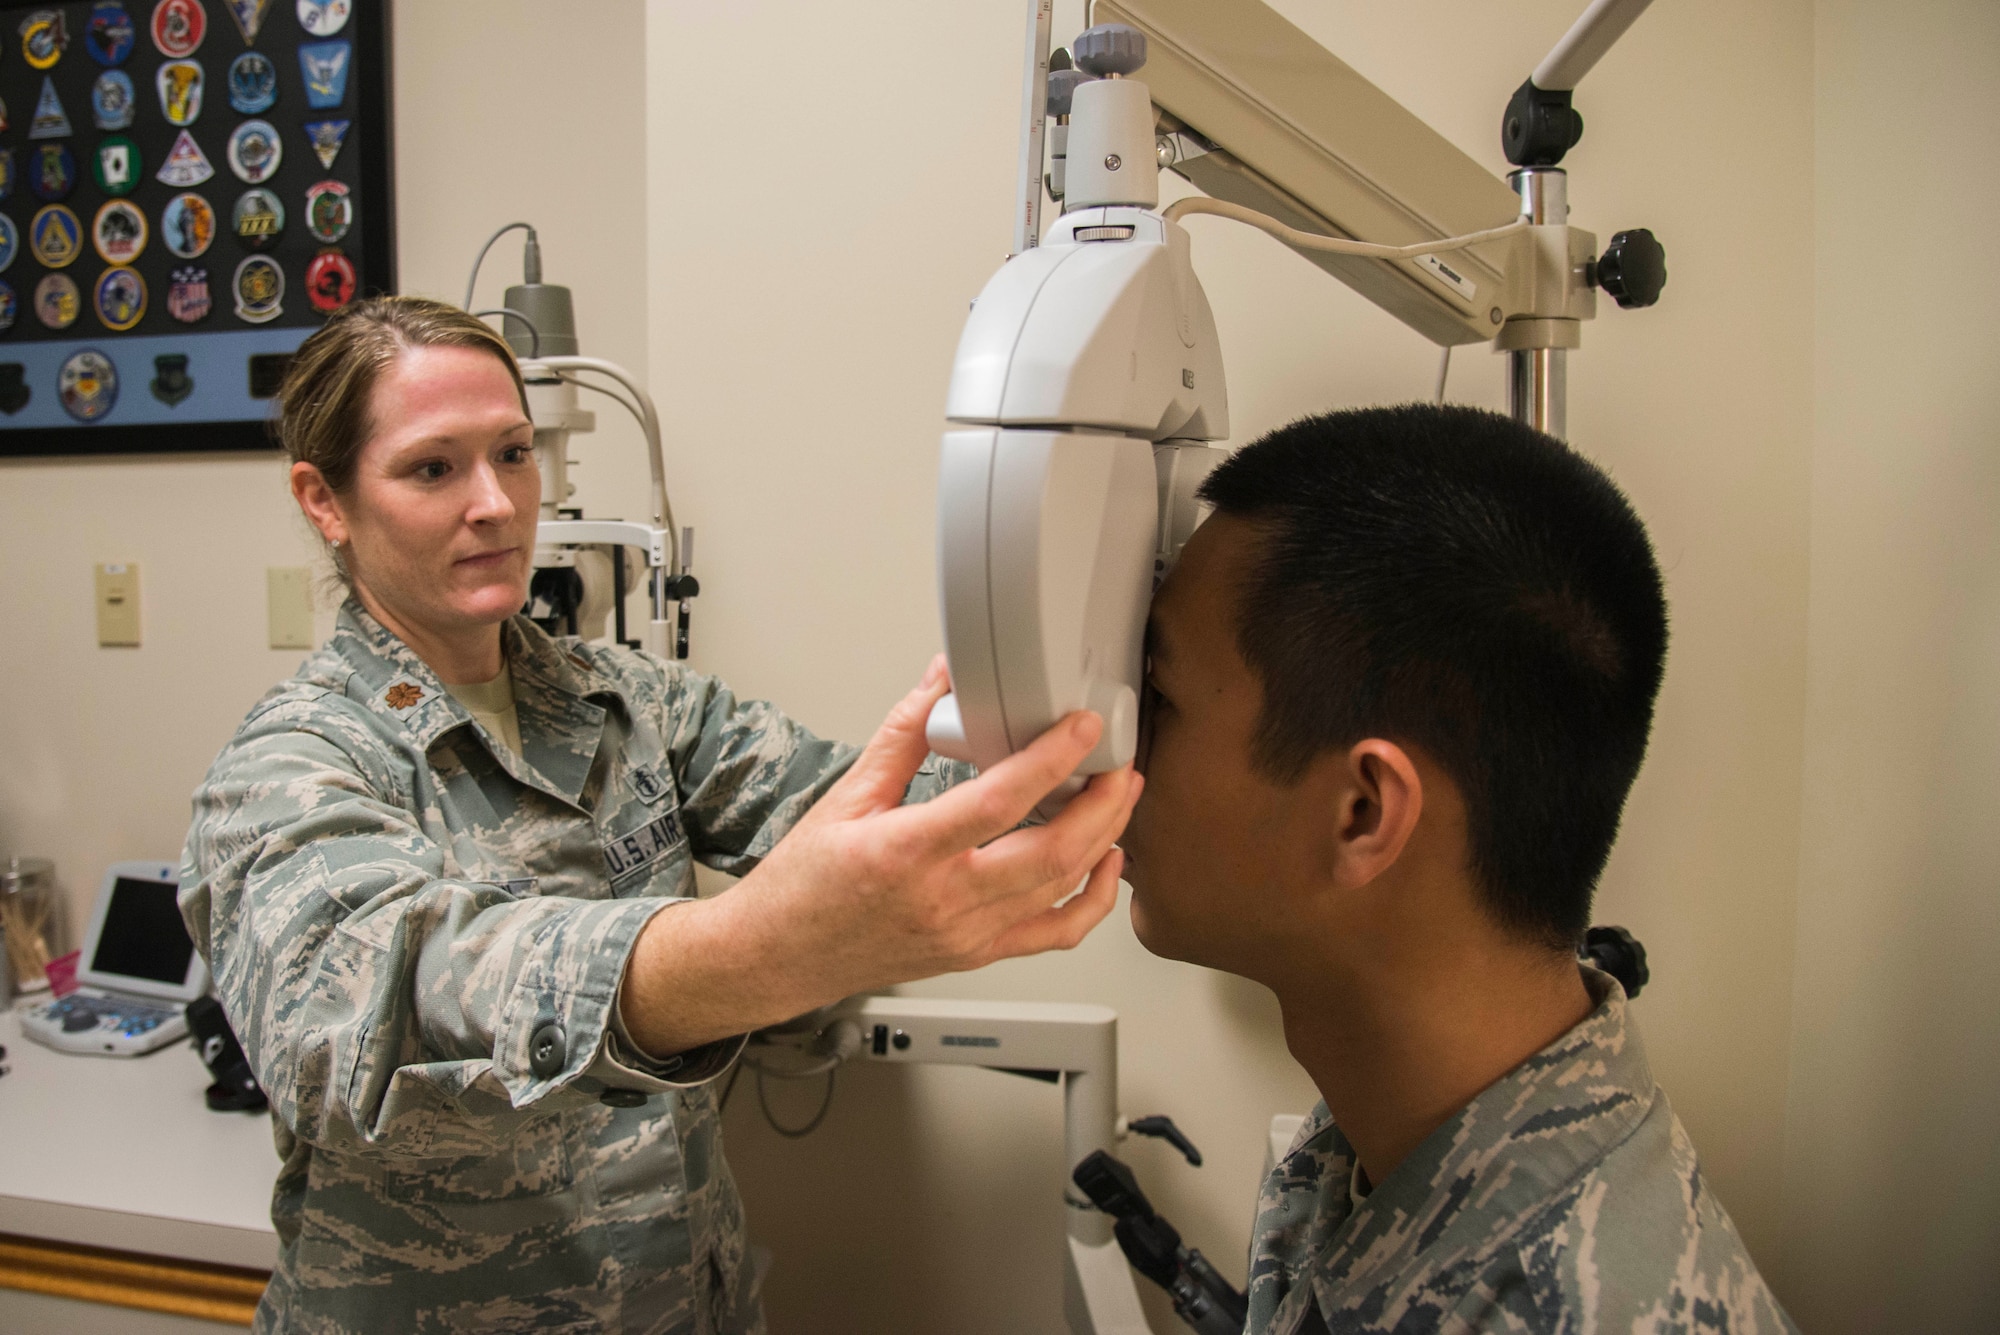 Maj. Kerry Phelan, 375th Aerospace Medicine optometry flight commander, performs an eye exam at the 375th Medical Group optometry department. Phelan will be awarded the overall Armed Forces Optomtrey Society Junior Optometrist of the Year 2016 on Nov. 8at the AFOS annual meeting in Anaheim, CA.  (U.S. Air Force Photo by Airman 1st Class Daniel Garcia)